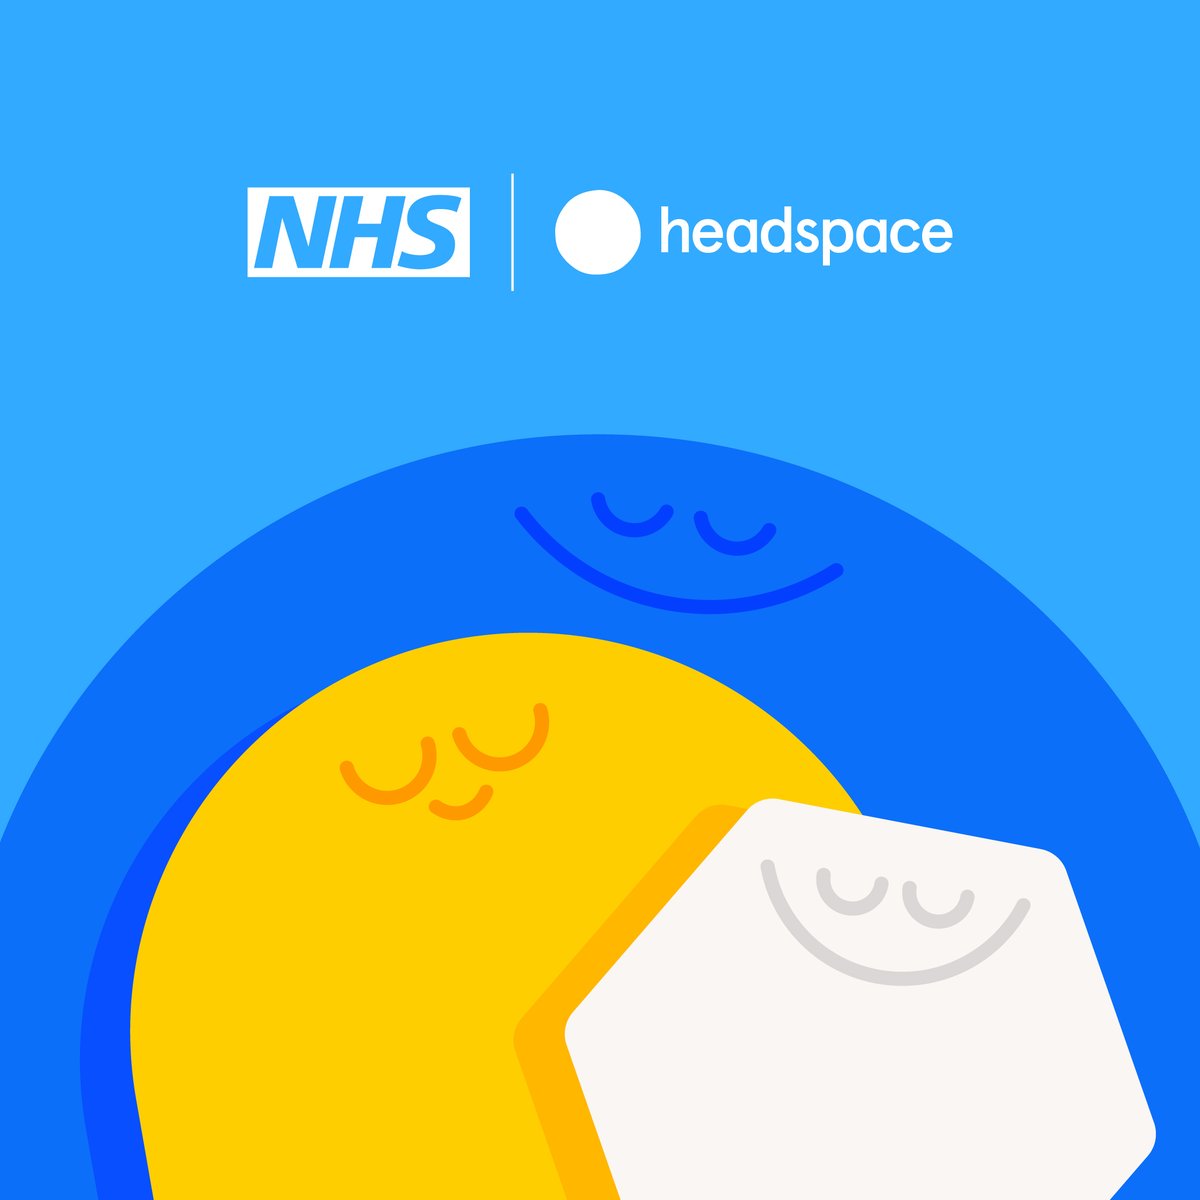 They’re here for us, we’re here for them — @Headspace has partnered with @NHSuk to provide free membership to all staff. Heartfelt thanks to every single healthcare professional working to protect us all. #NHSstaff link here: headspace.com/nhs